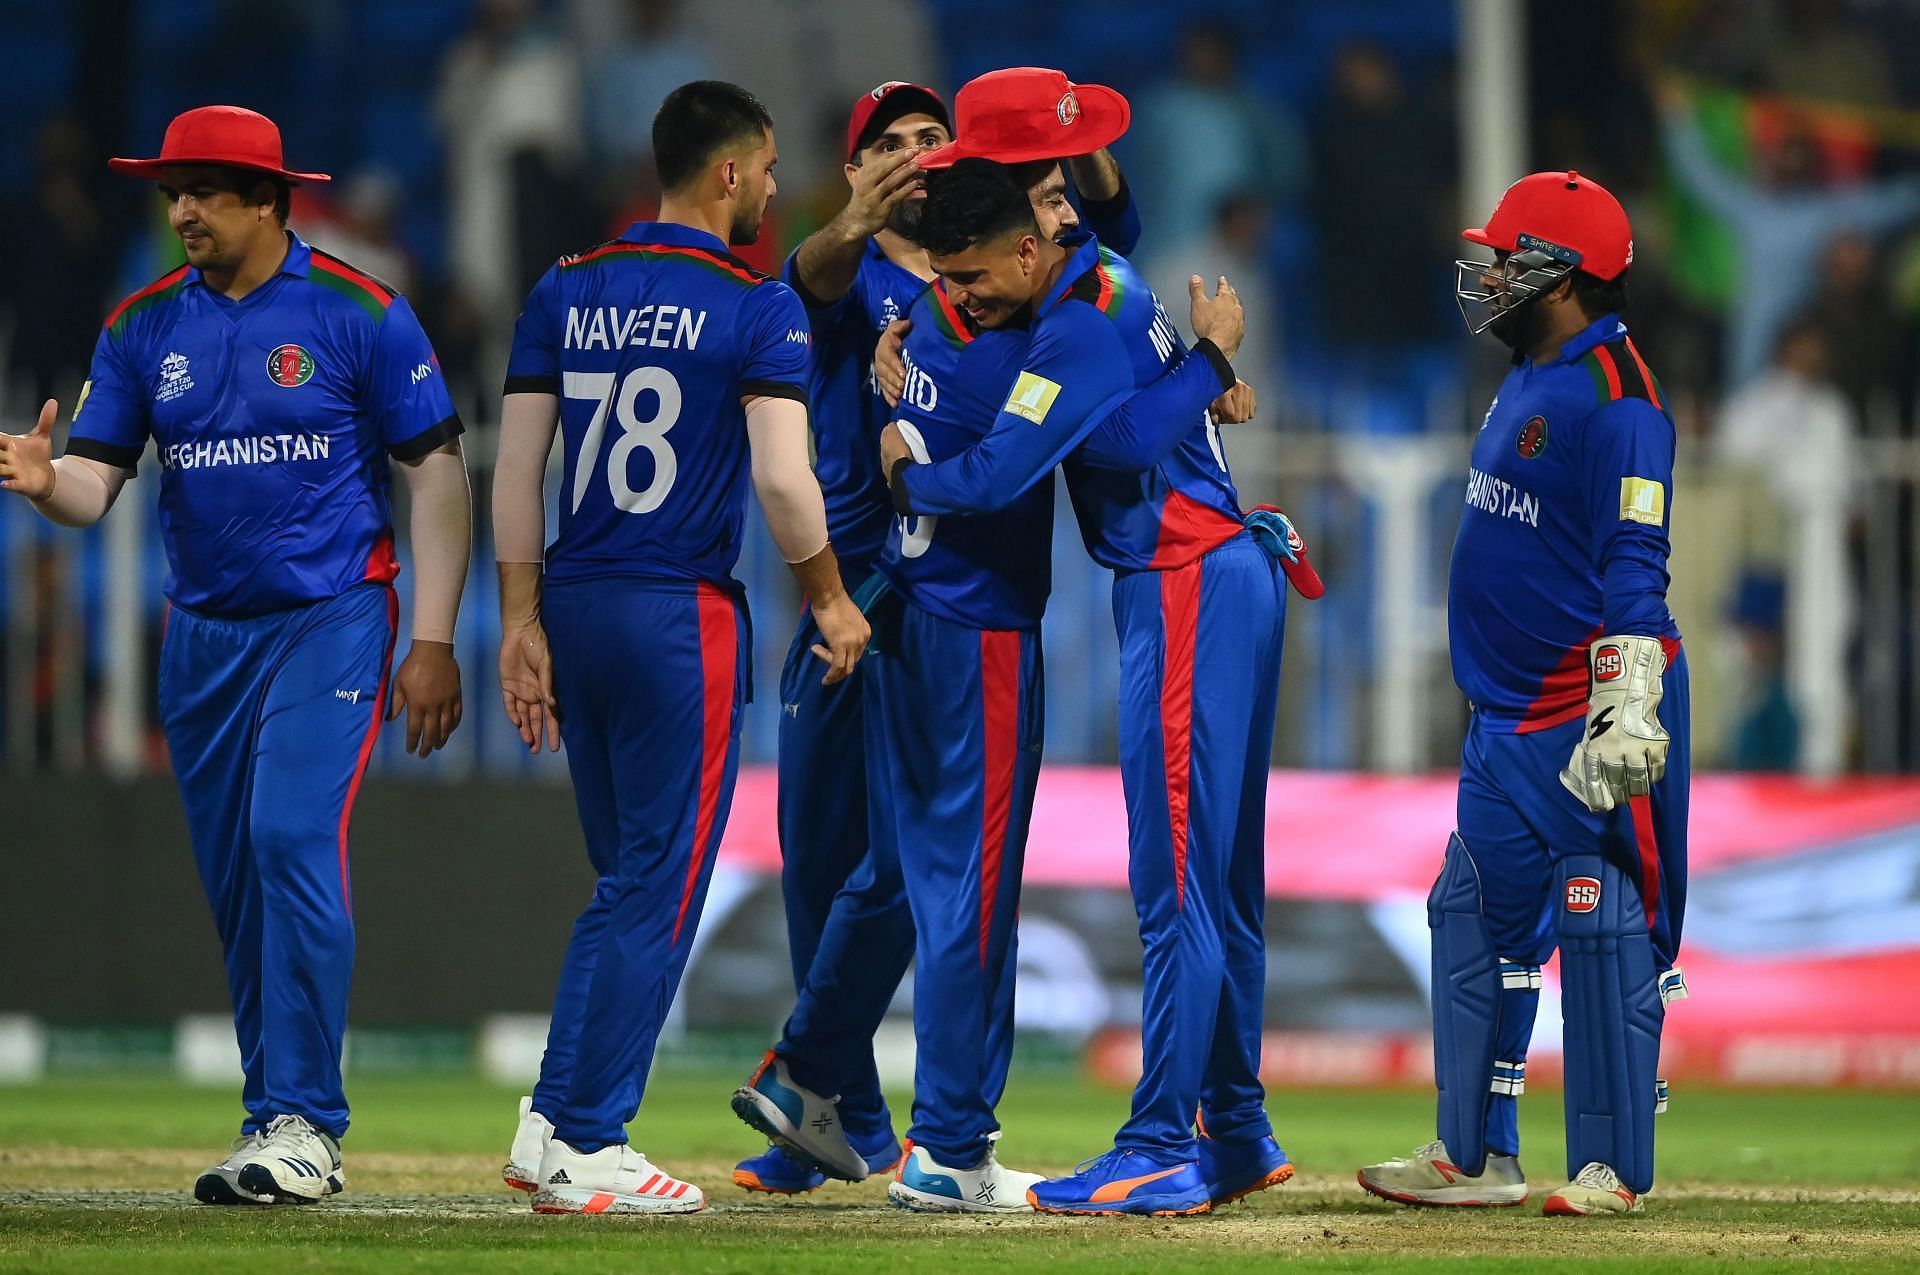 Afghanistan were at their best against Scotland